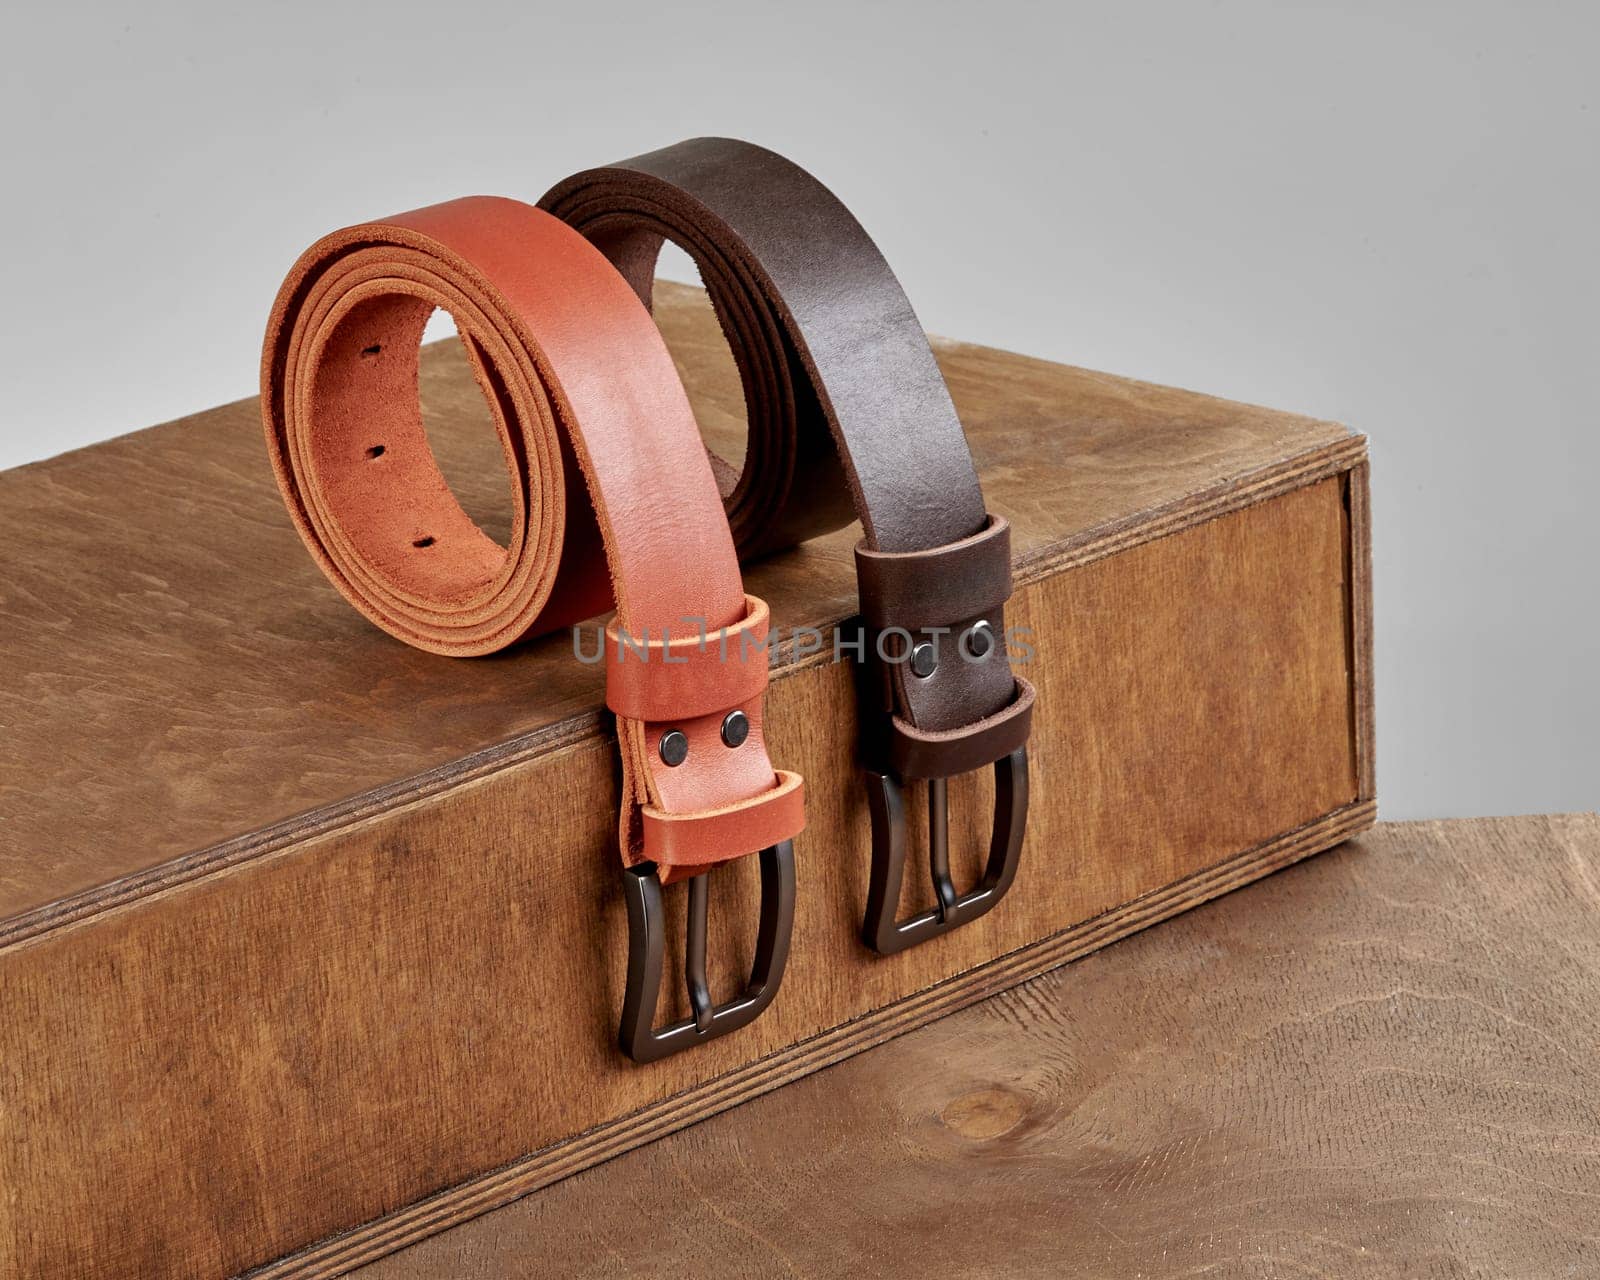 Two folded stylish leather belts with DAD embossment and metal matte buckles showcased on wooden display steps. Fashionable personalized mens accessories concept